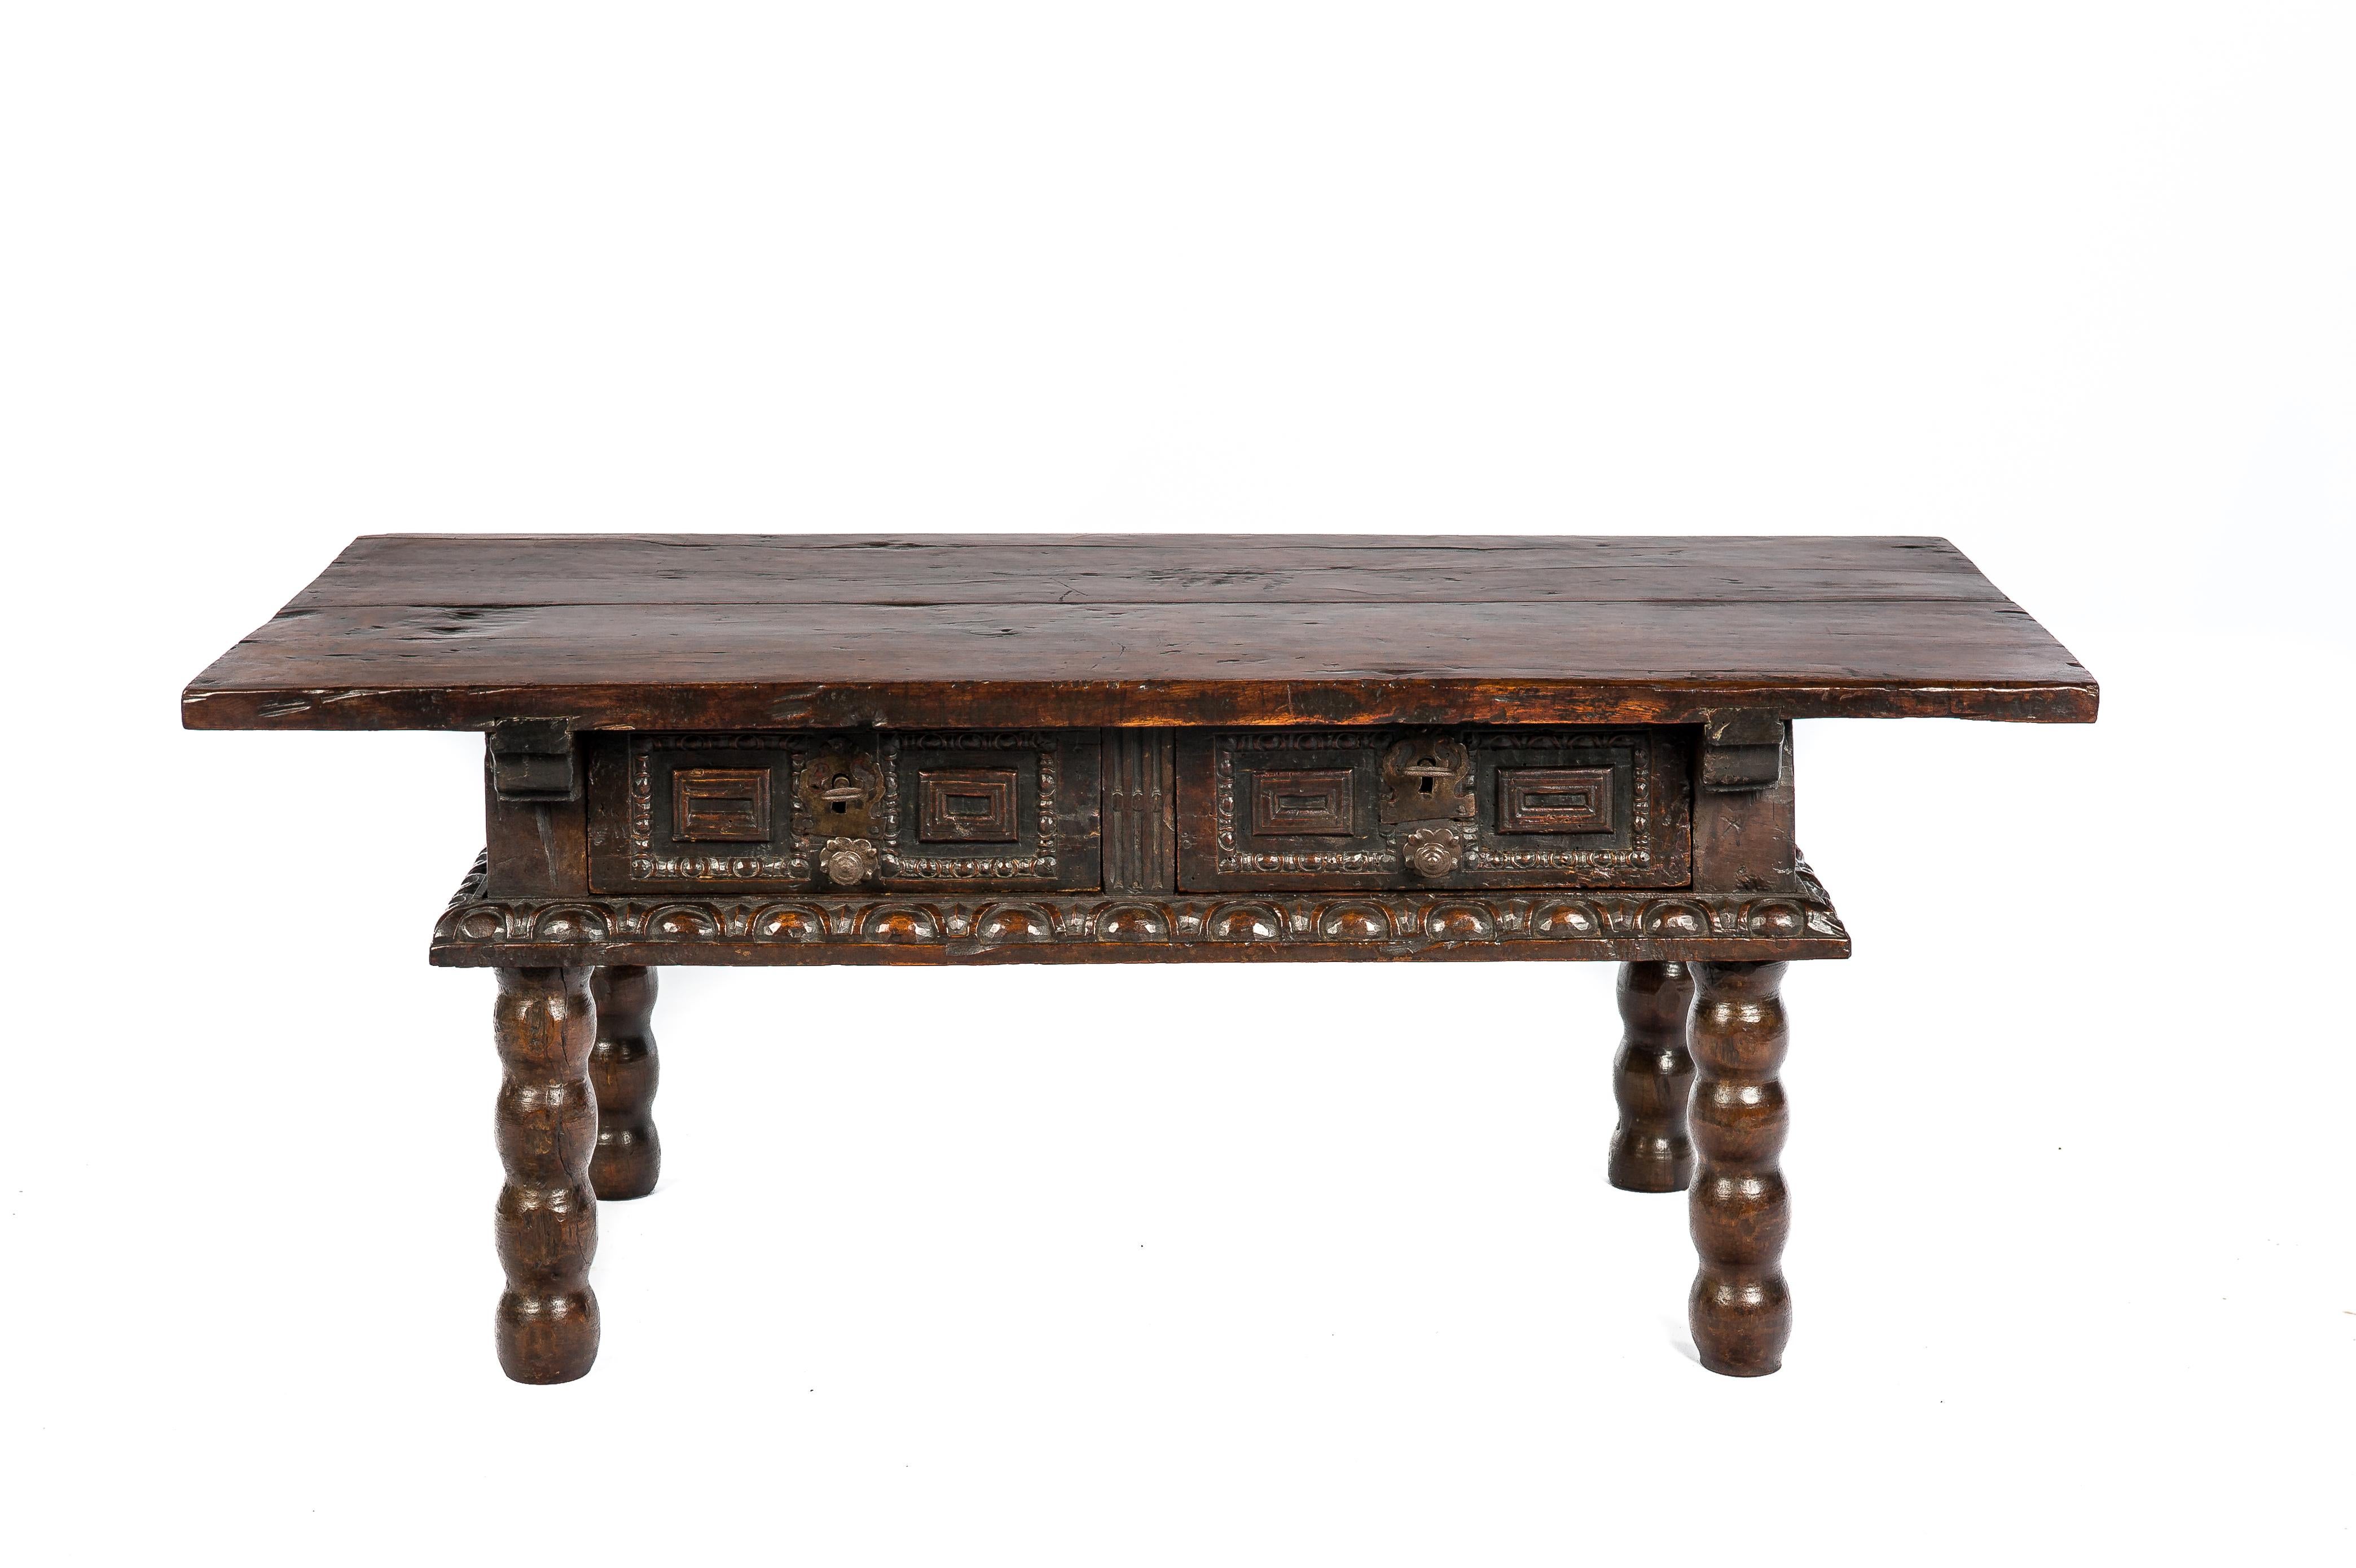 A rustic walnut coffee table that originates in Spain circa 1680.
Its top is made from two pieces of solid thick walnut with beautiful grain. Below two drawers are situated. The drawer fronts have a hand carved gadrooned mold and elevated panels.